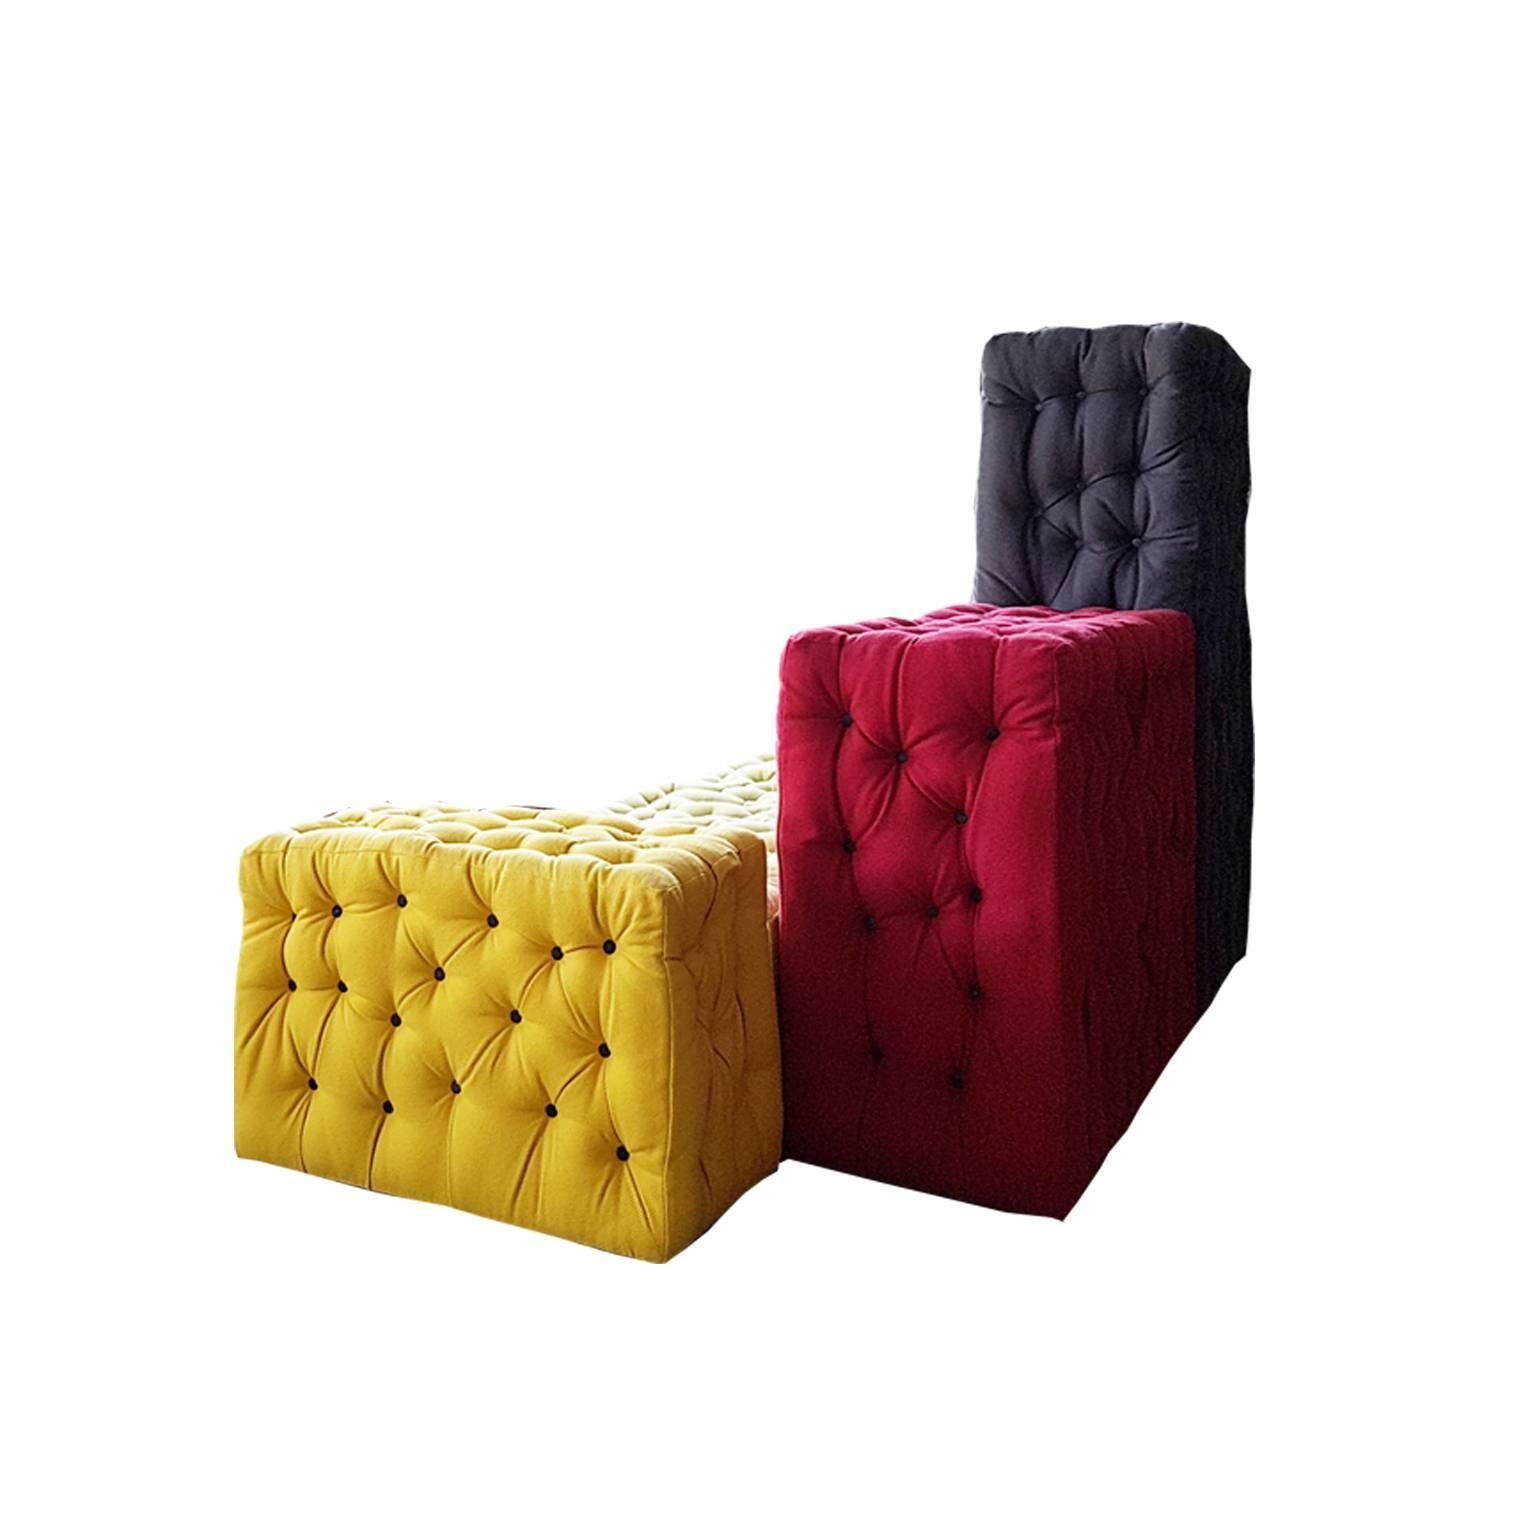 Contemporary Italian Sofa by Gaetano Pesce in Fabric Yellow Red Green Grey Brown 21st Century